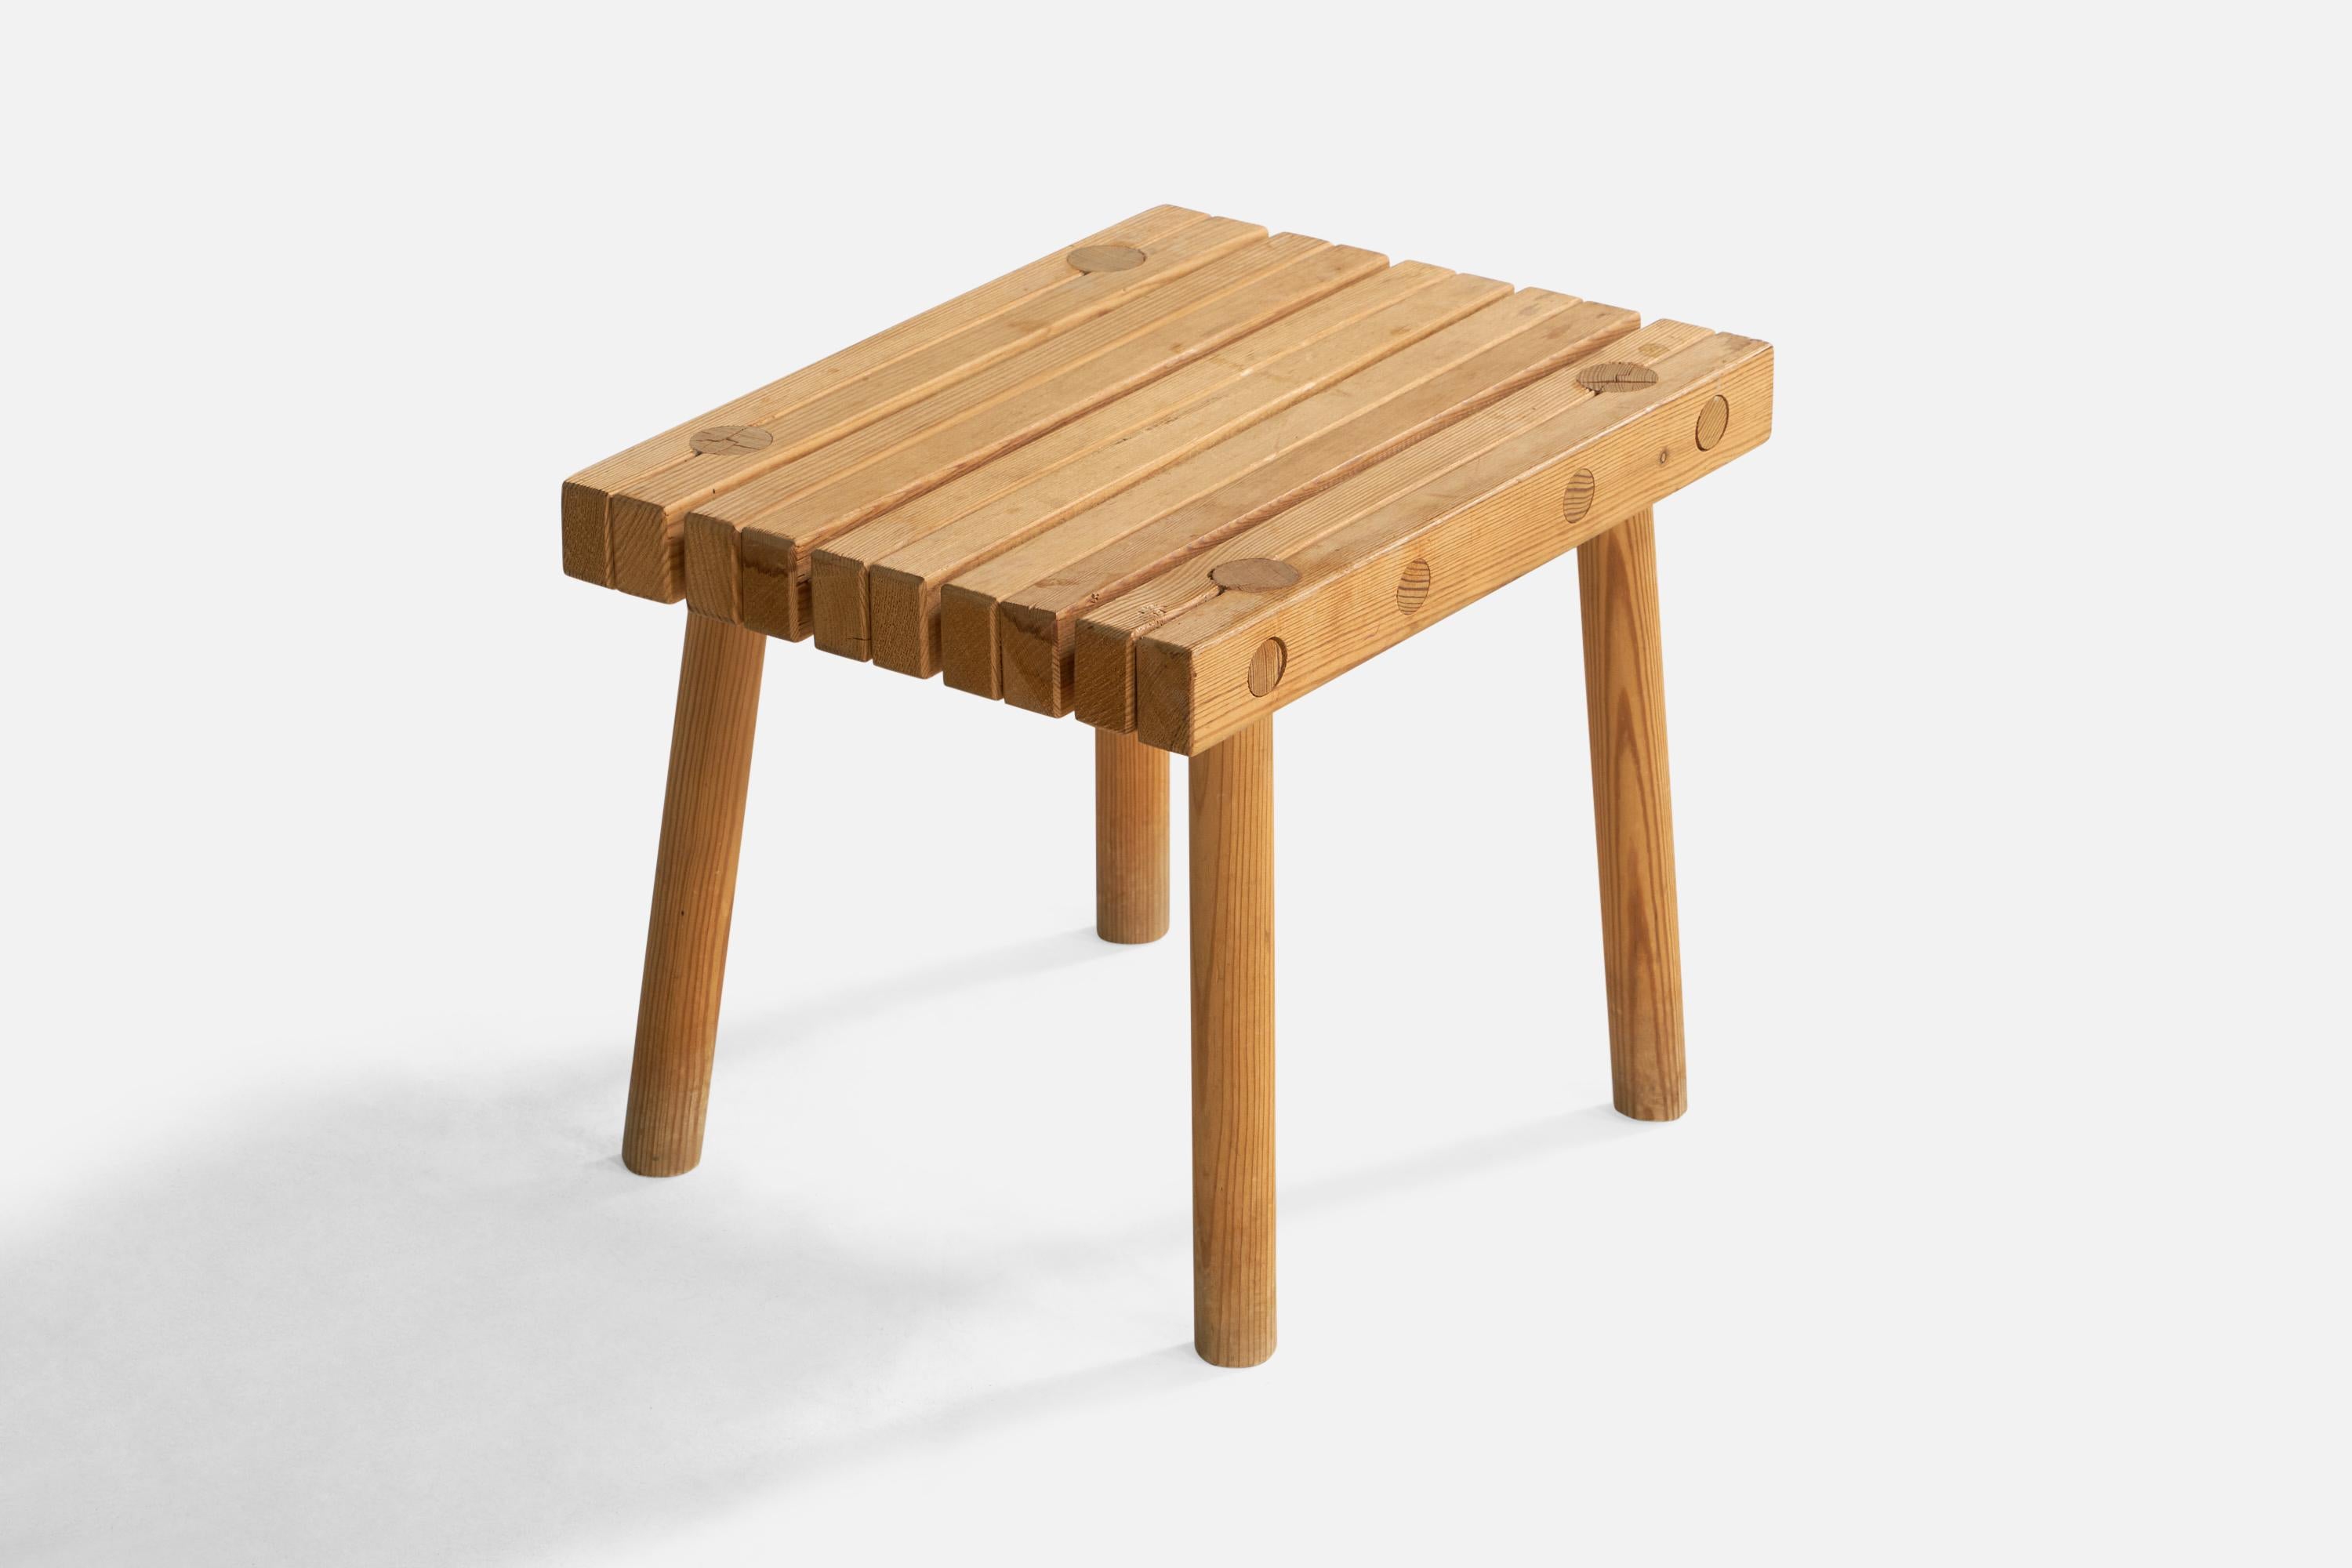 A pine stool or side table designed and produced in Sweden, 1970s.